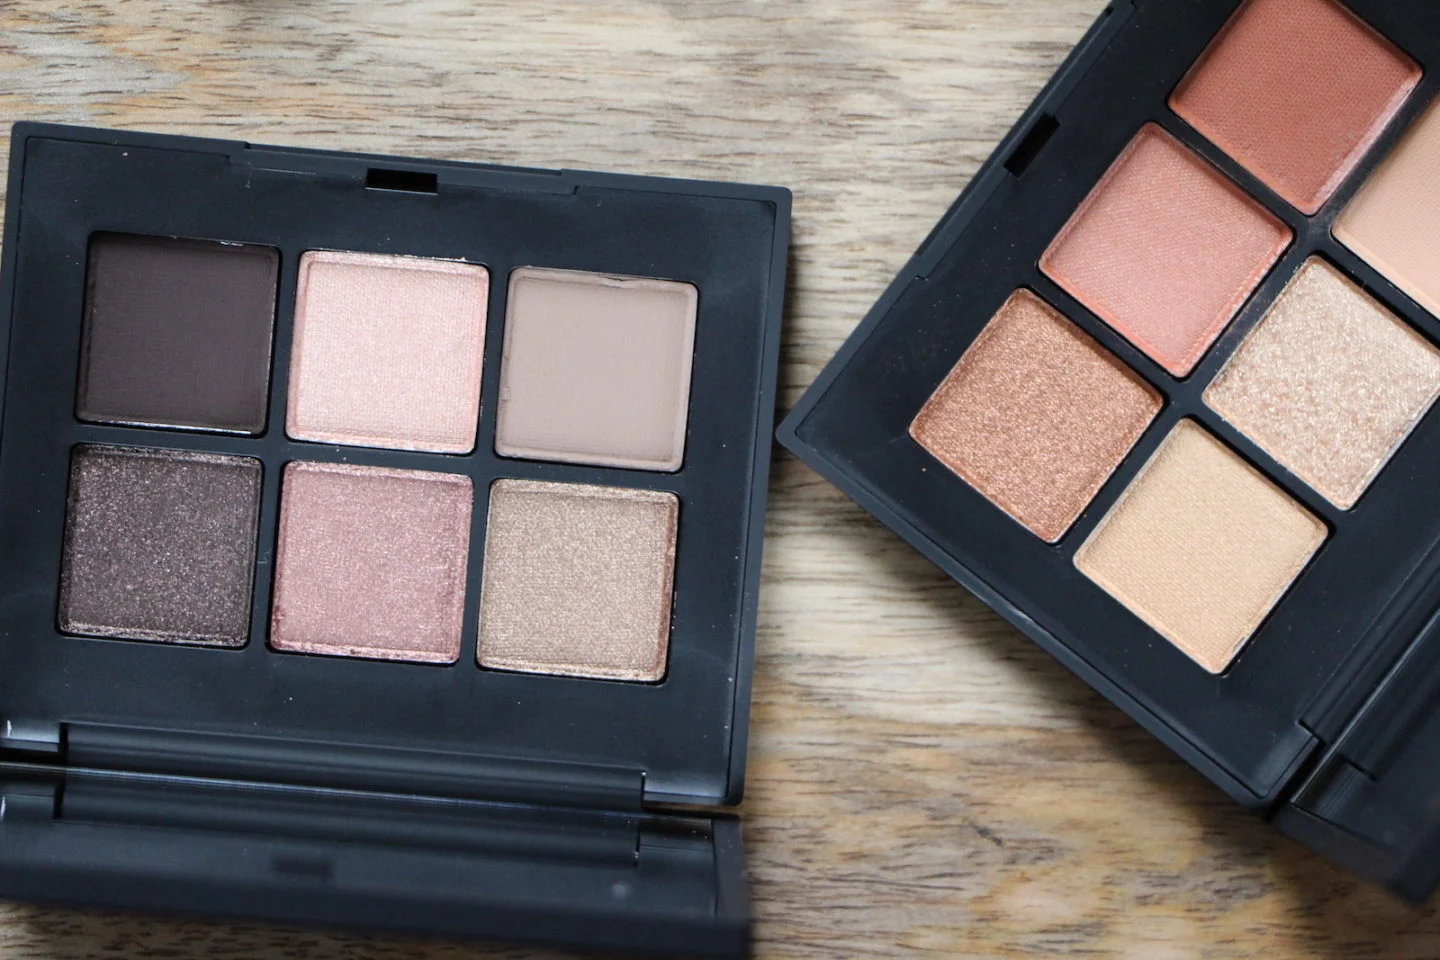 NARS Voyageur Eyeshadow Palettes - Ruth Crilly